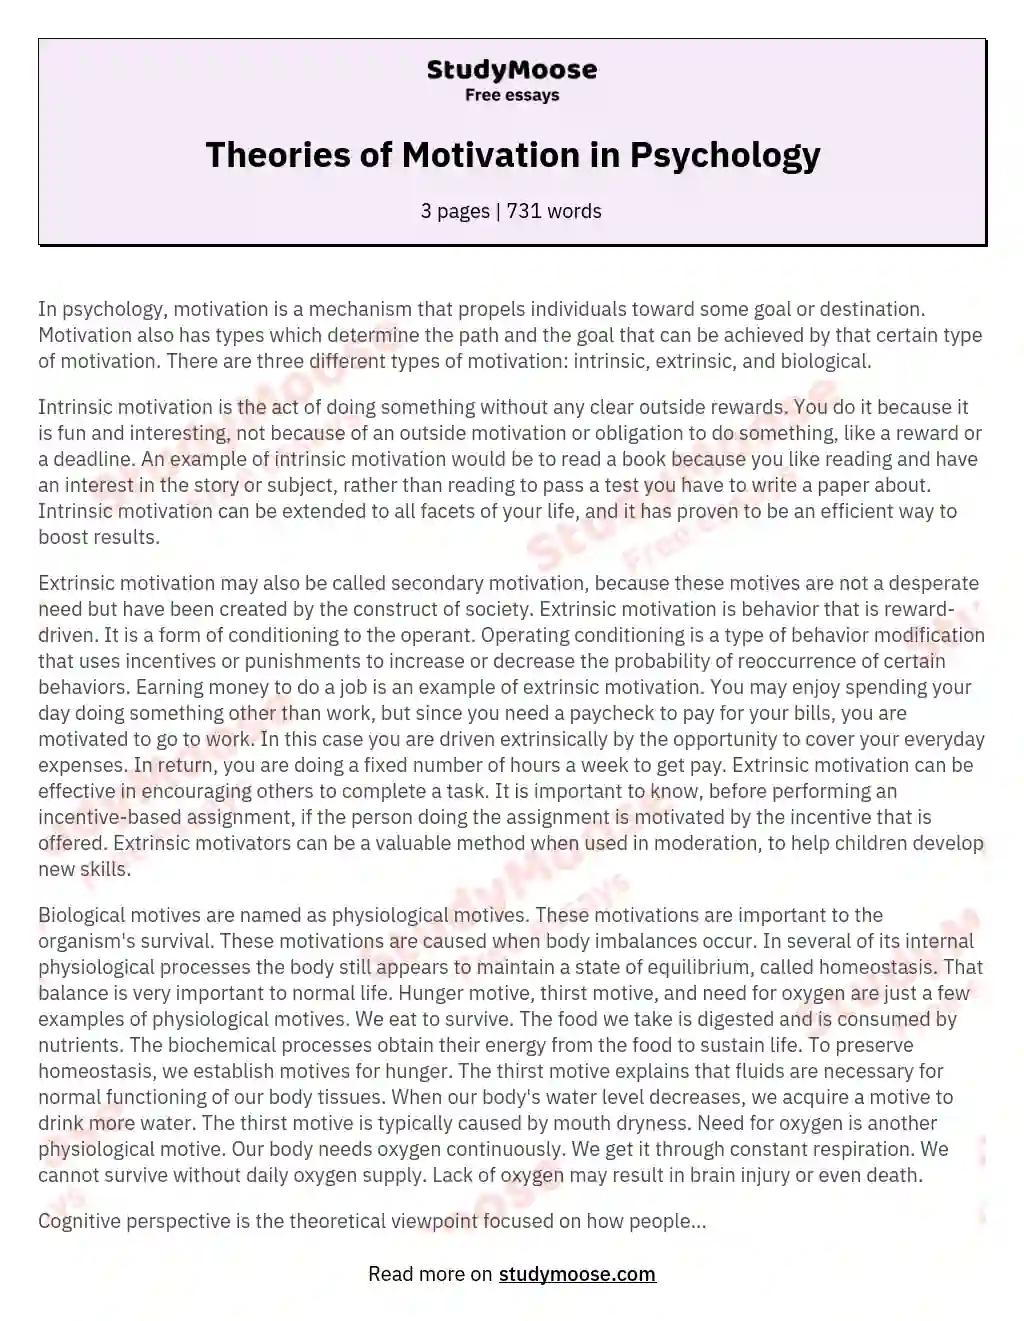 Theories of Motivation in Psychology essay